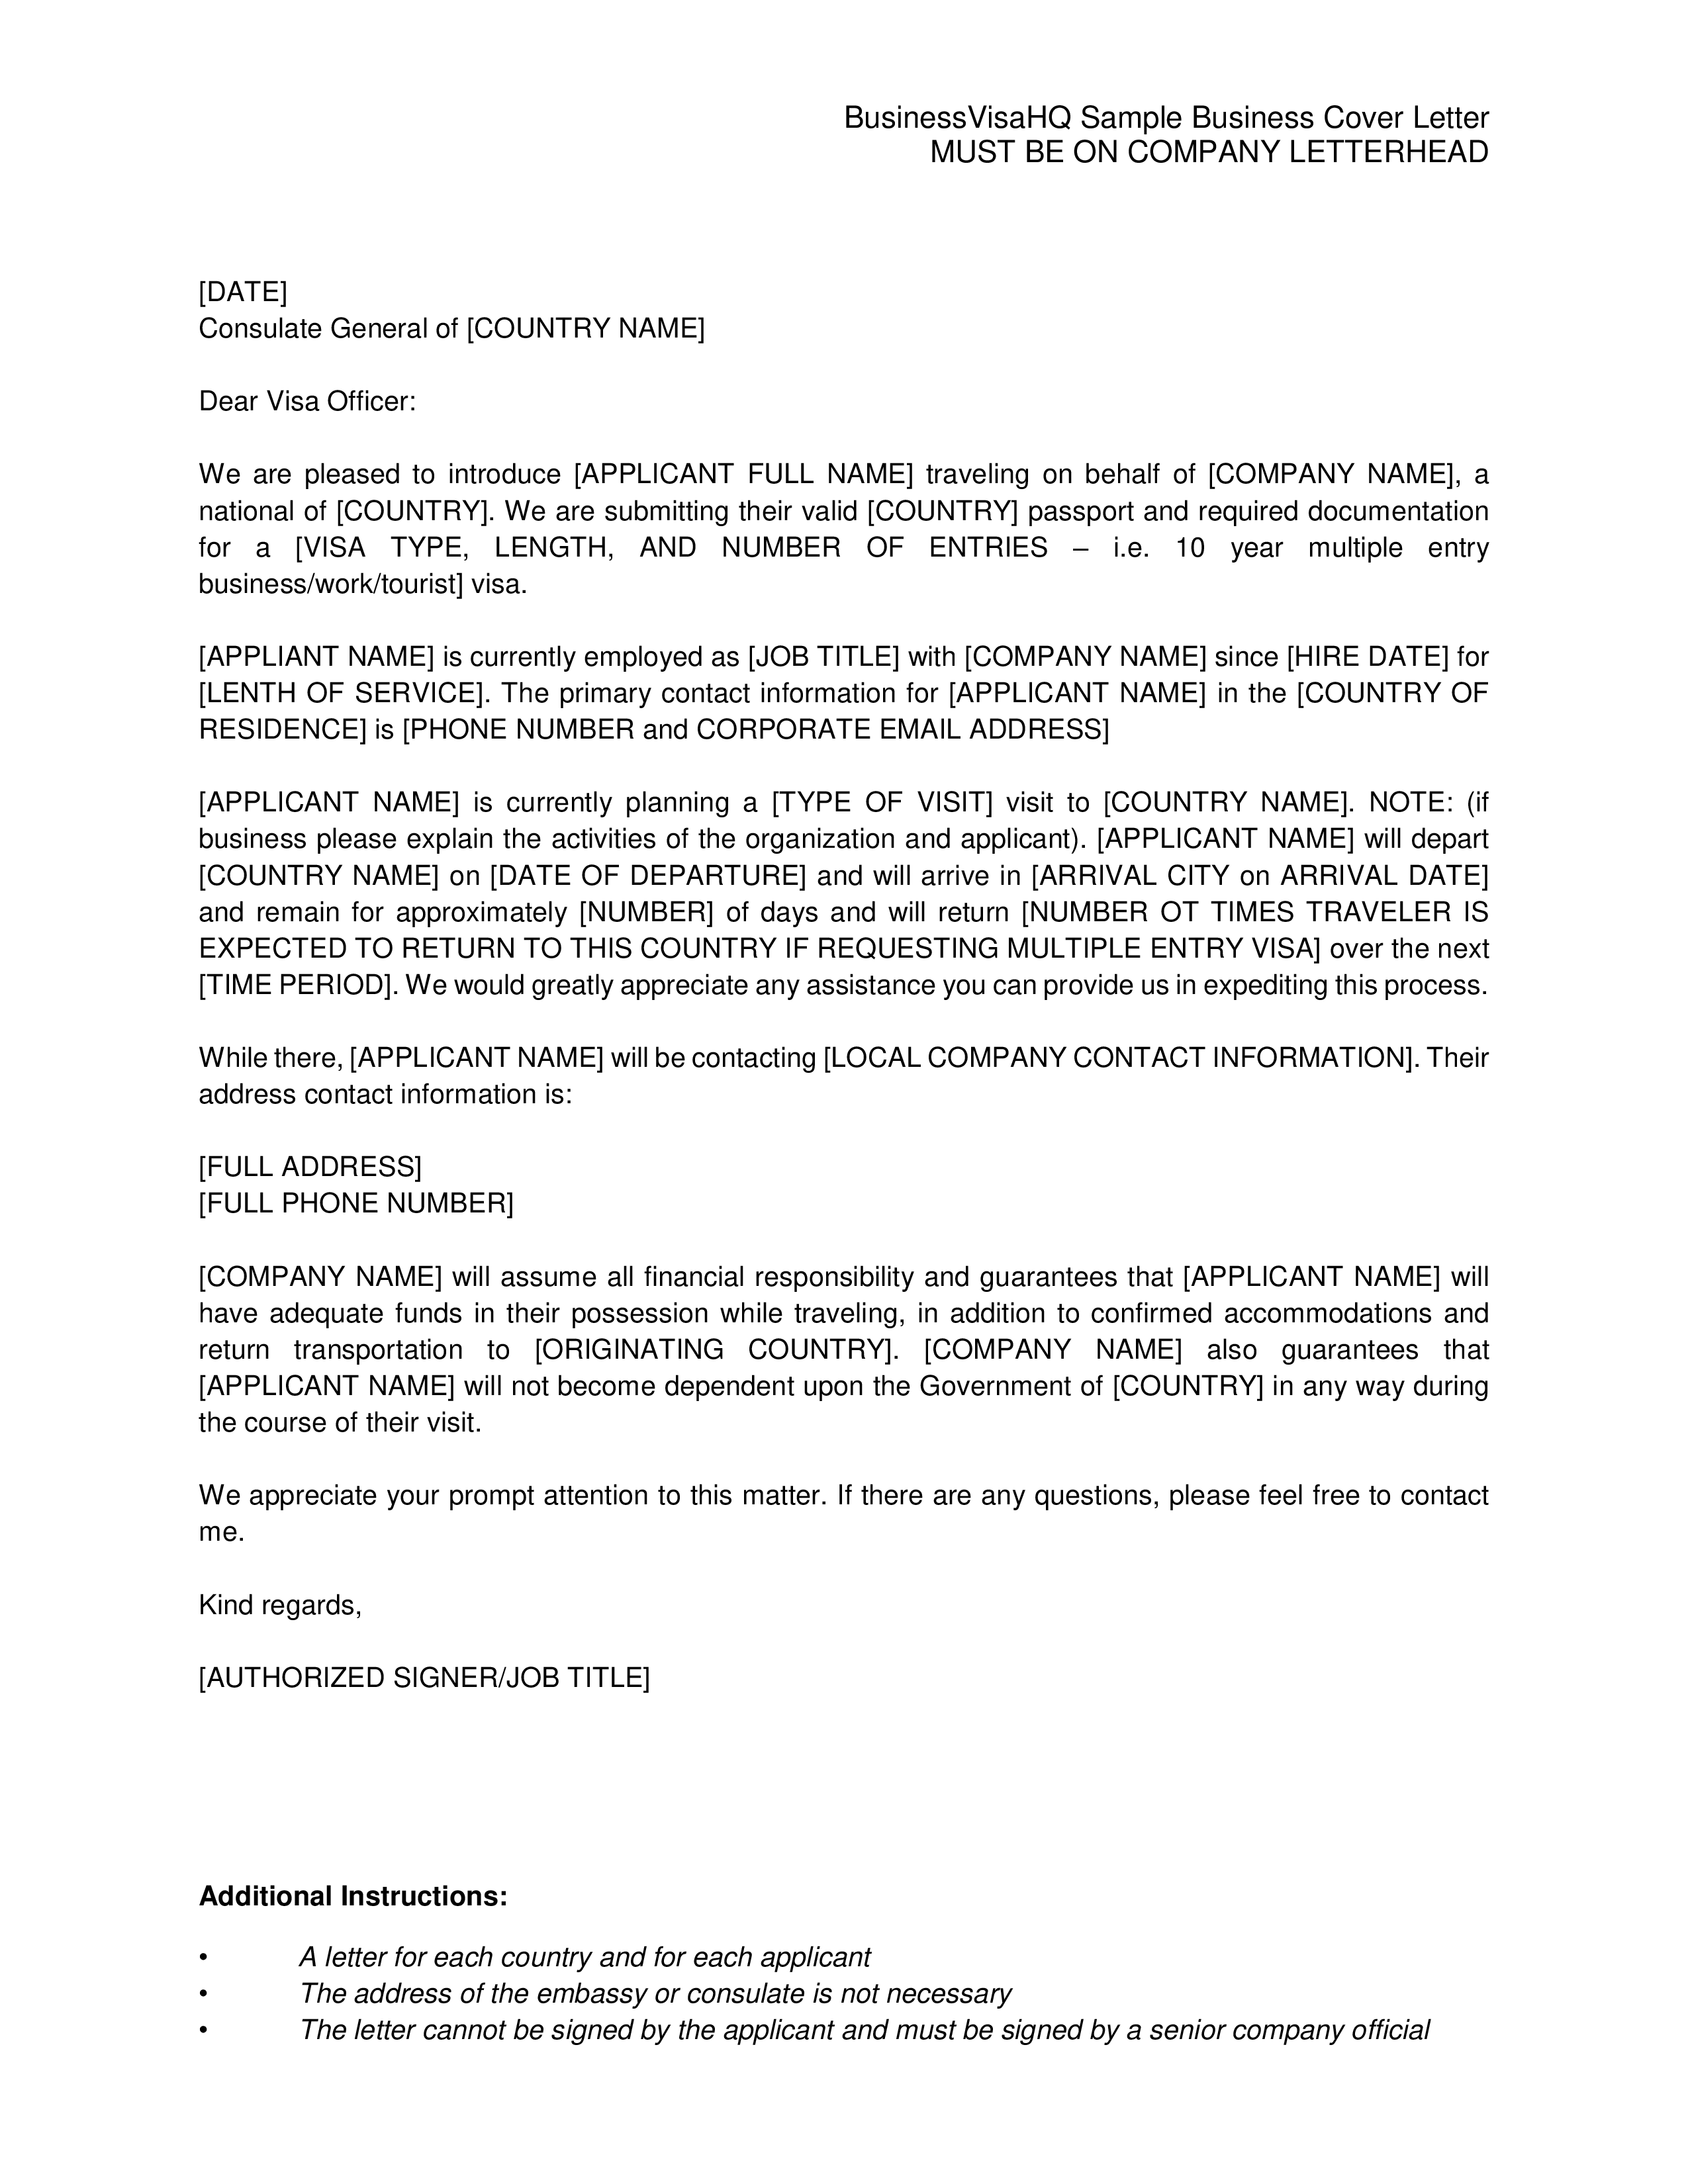 sample business cover letter template